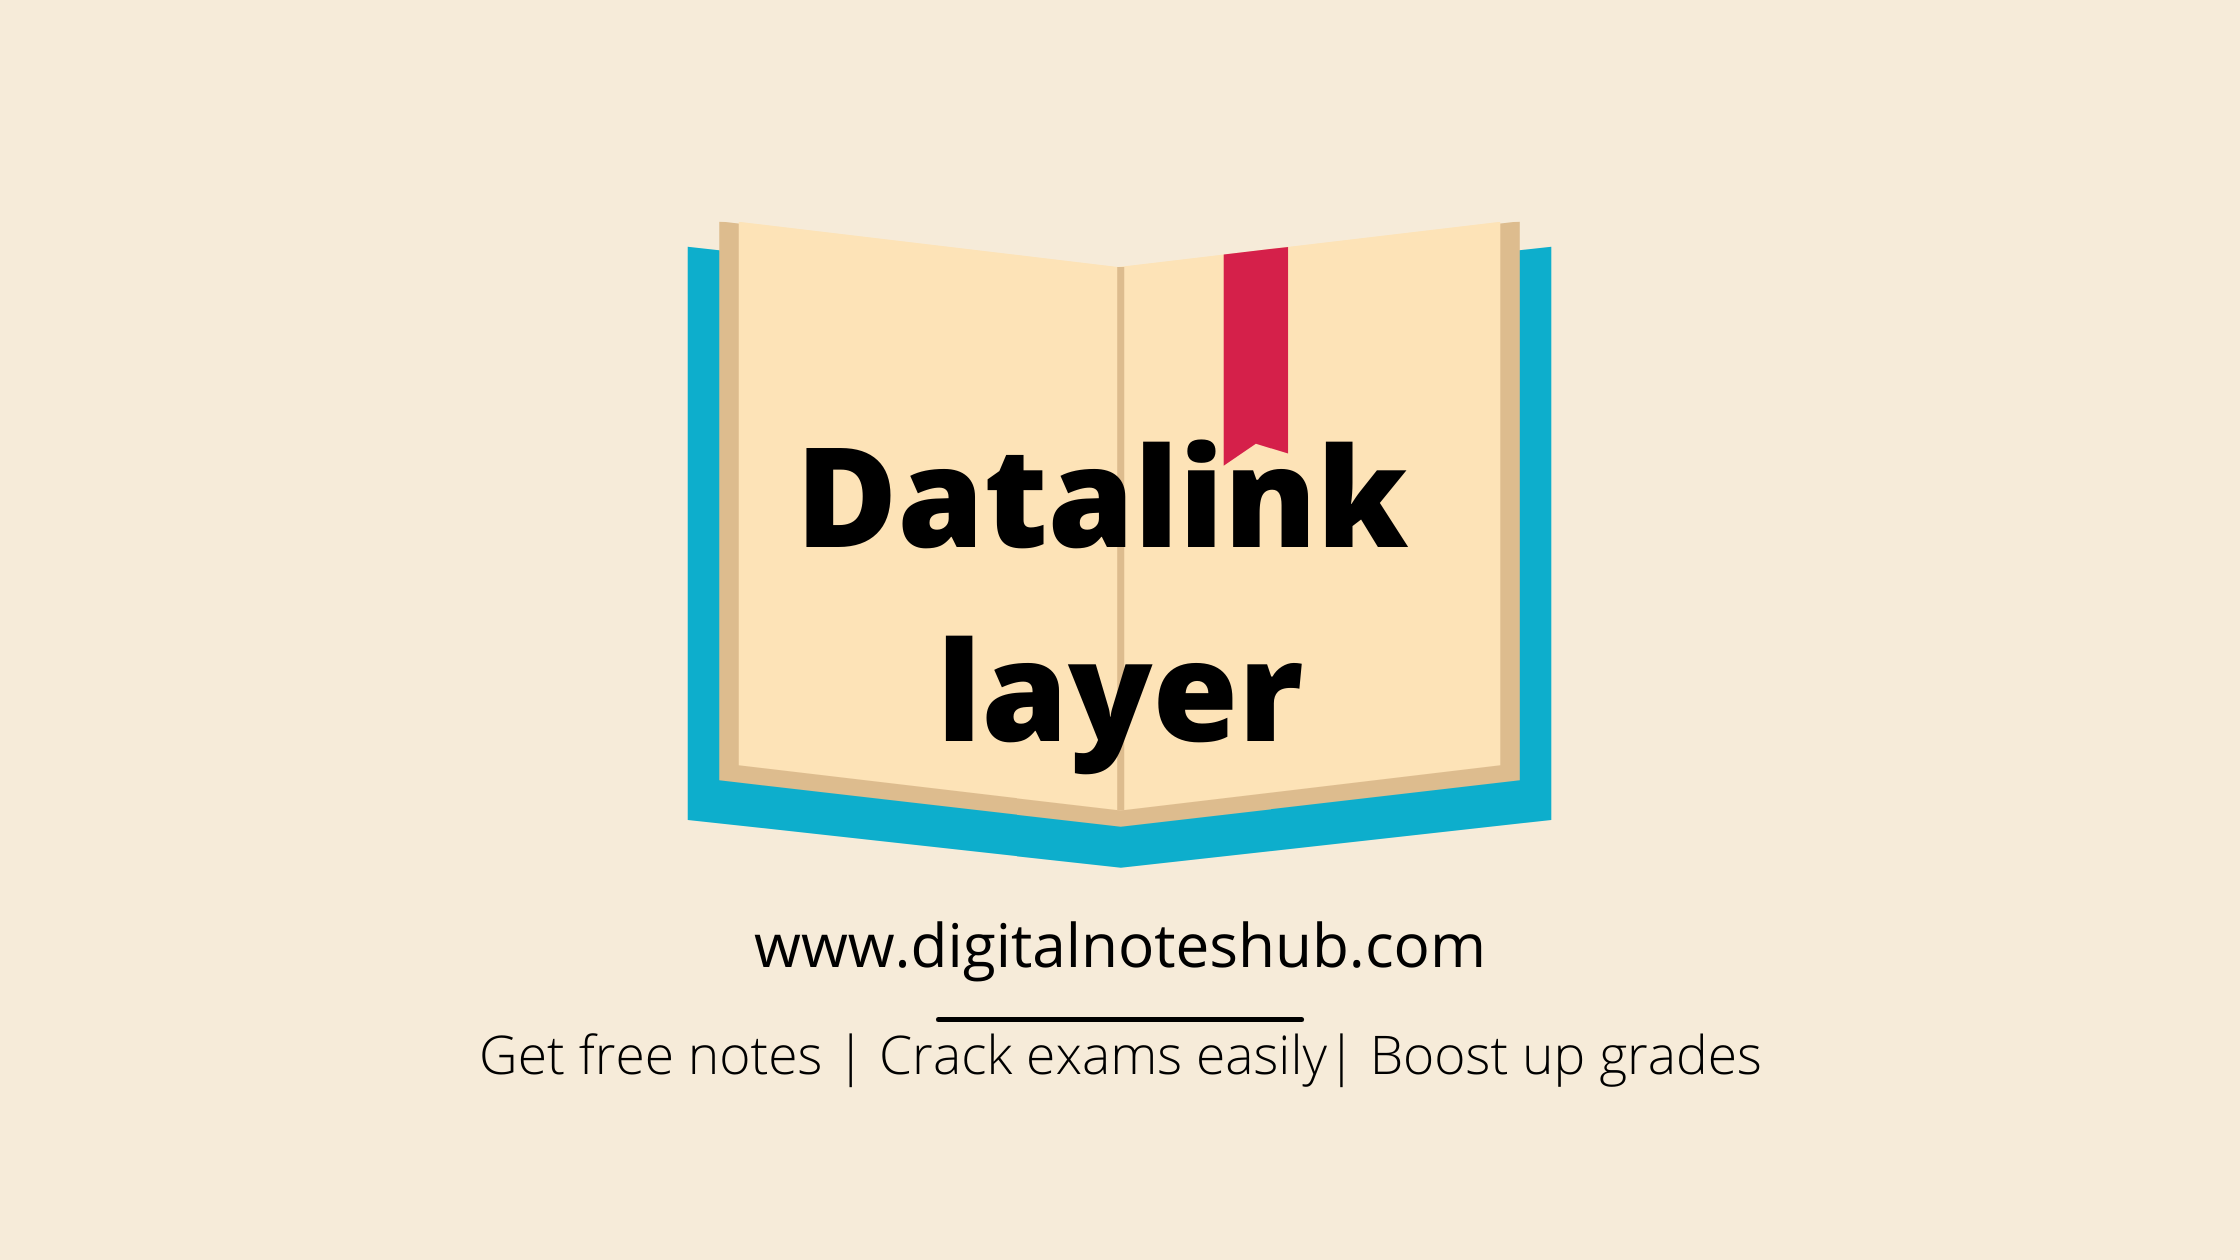 Design Issues of Data link layer